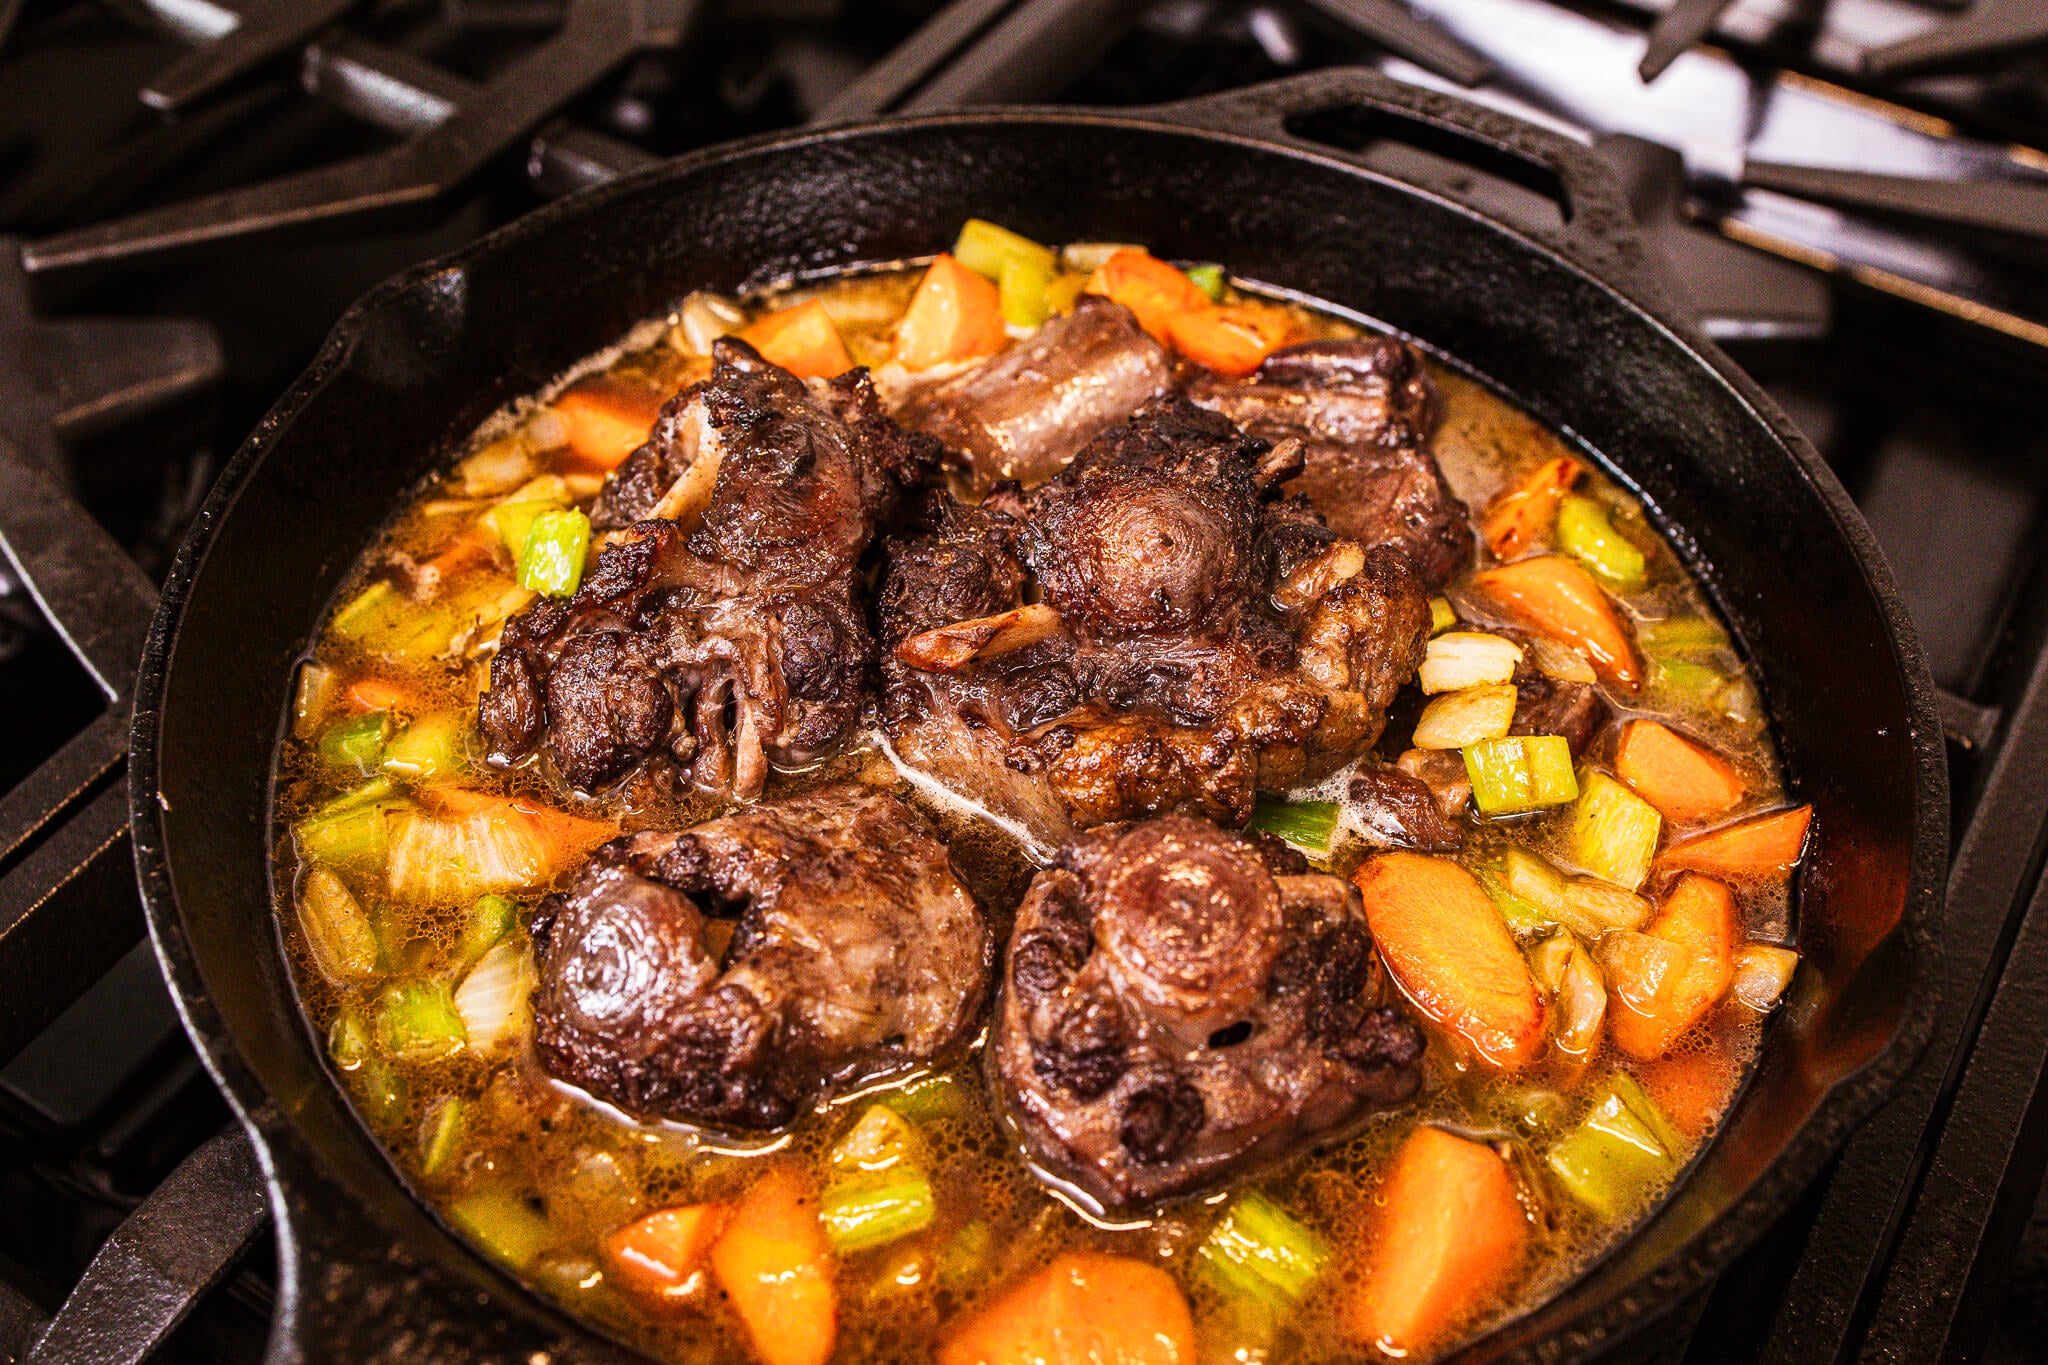 Beef Oxtail - $15 / lbs